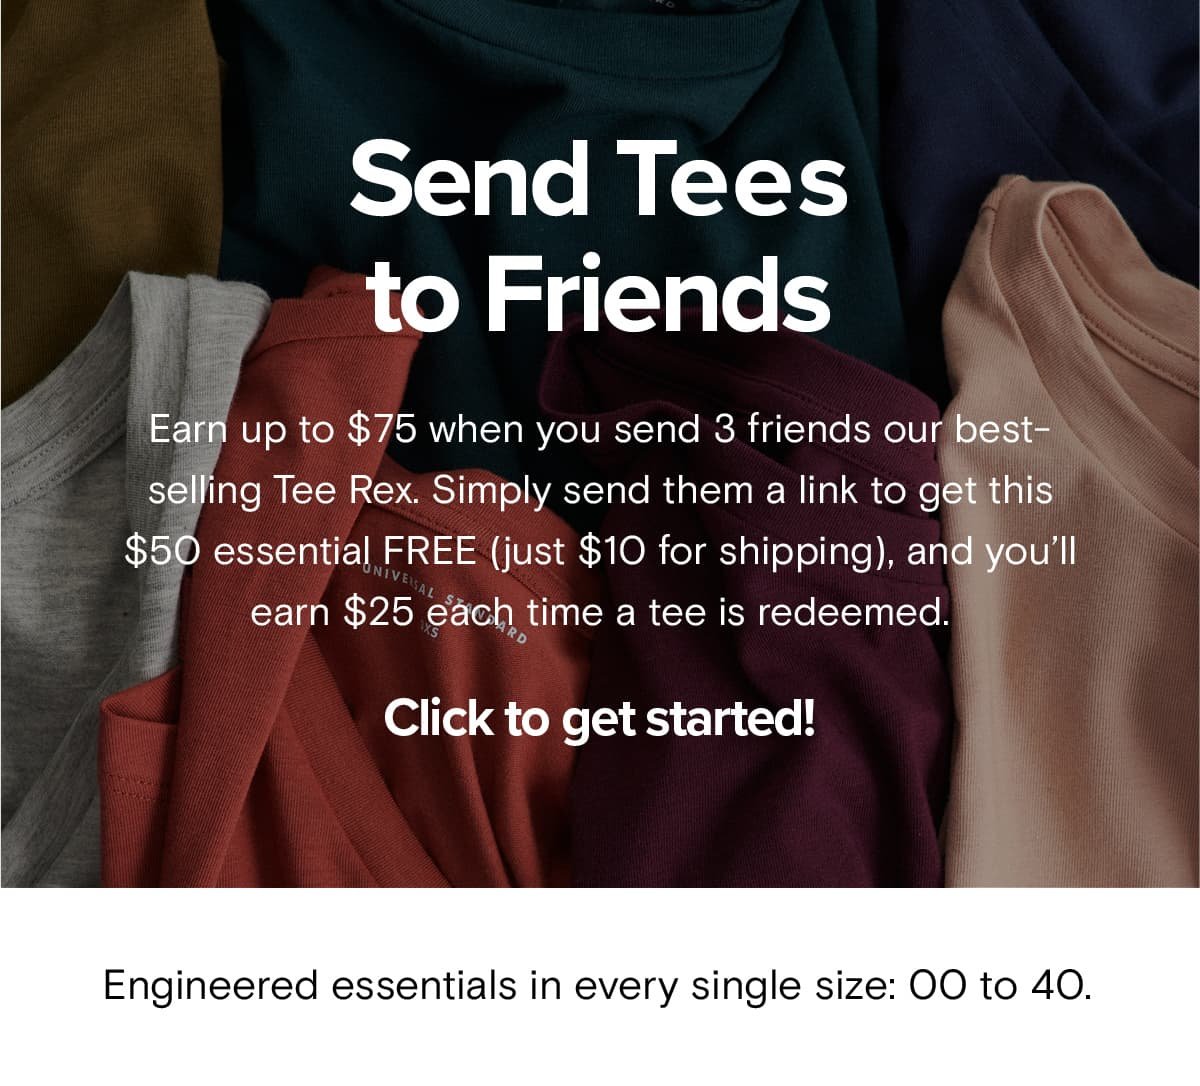 Earn up to $75 when you send 3 friends our best-selling Tee Rex.